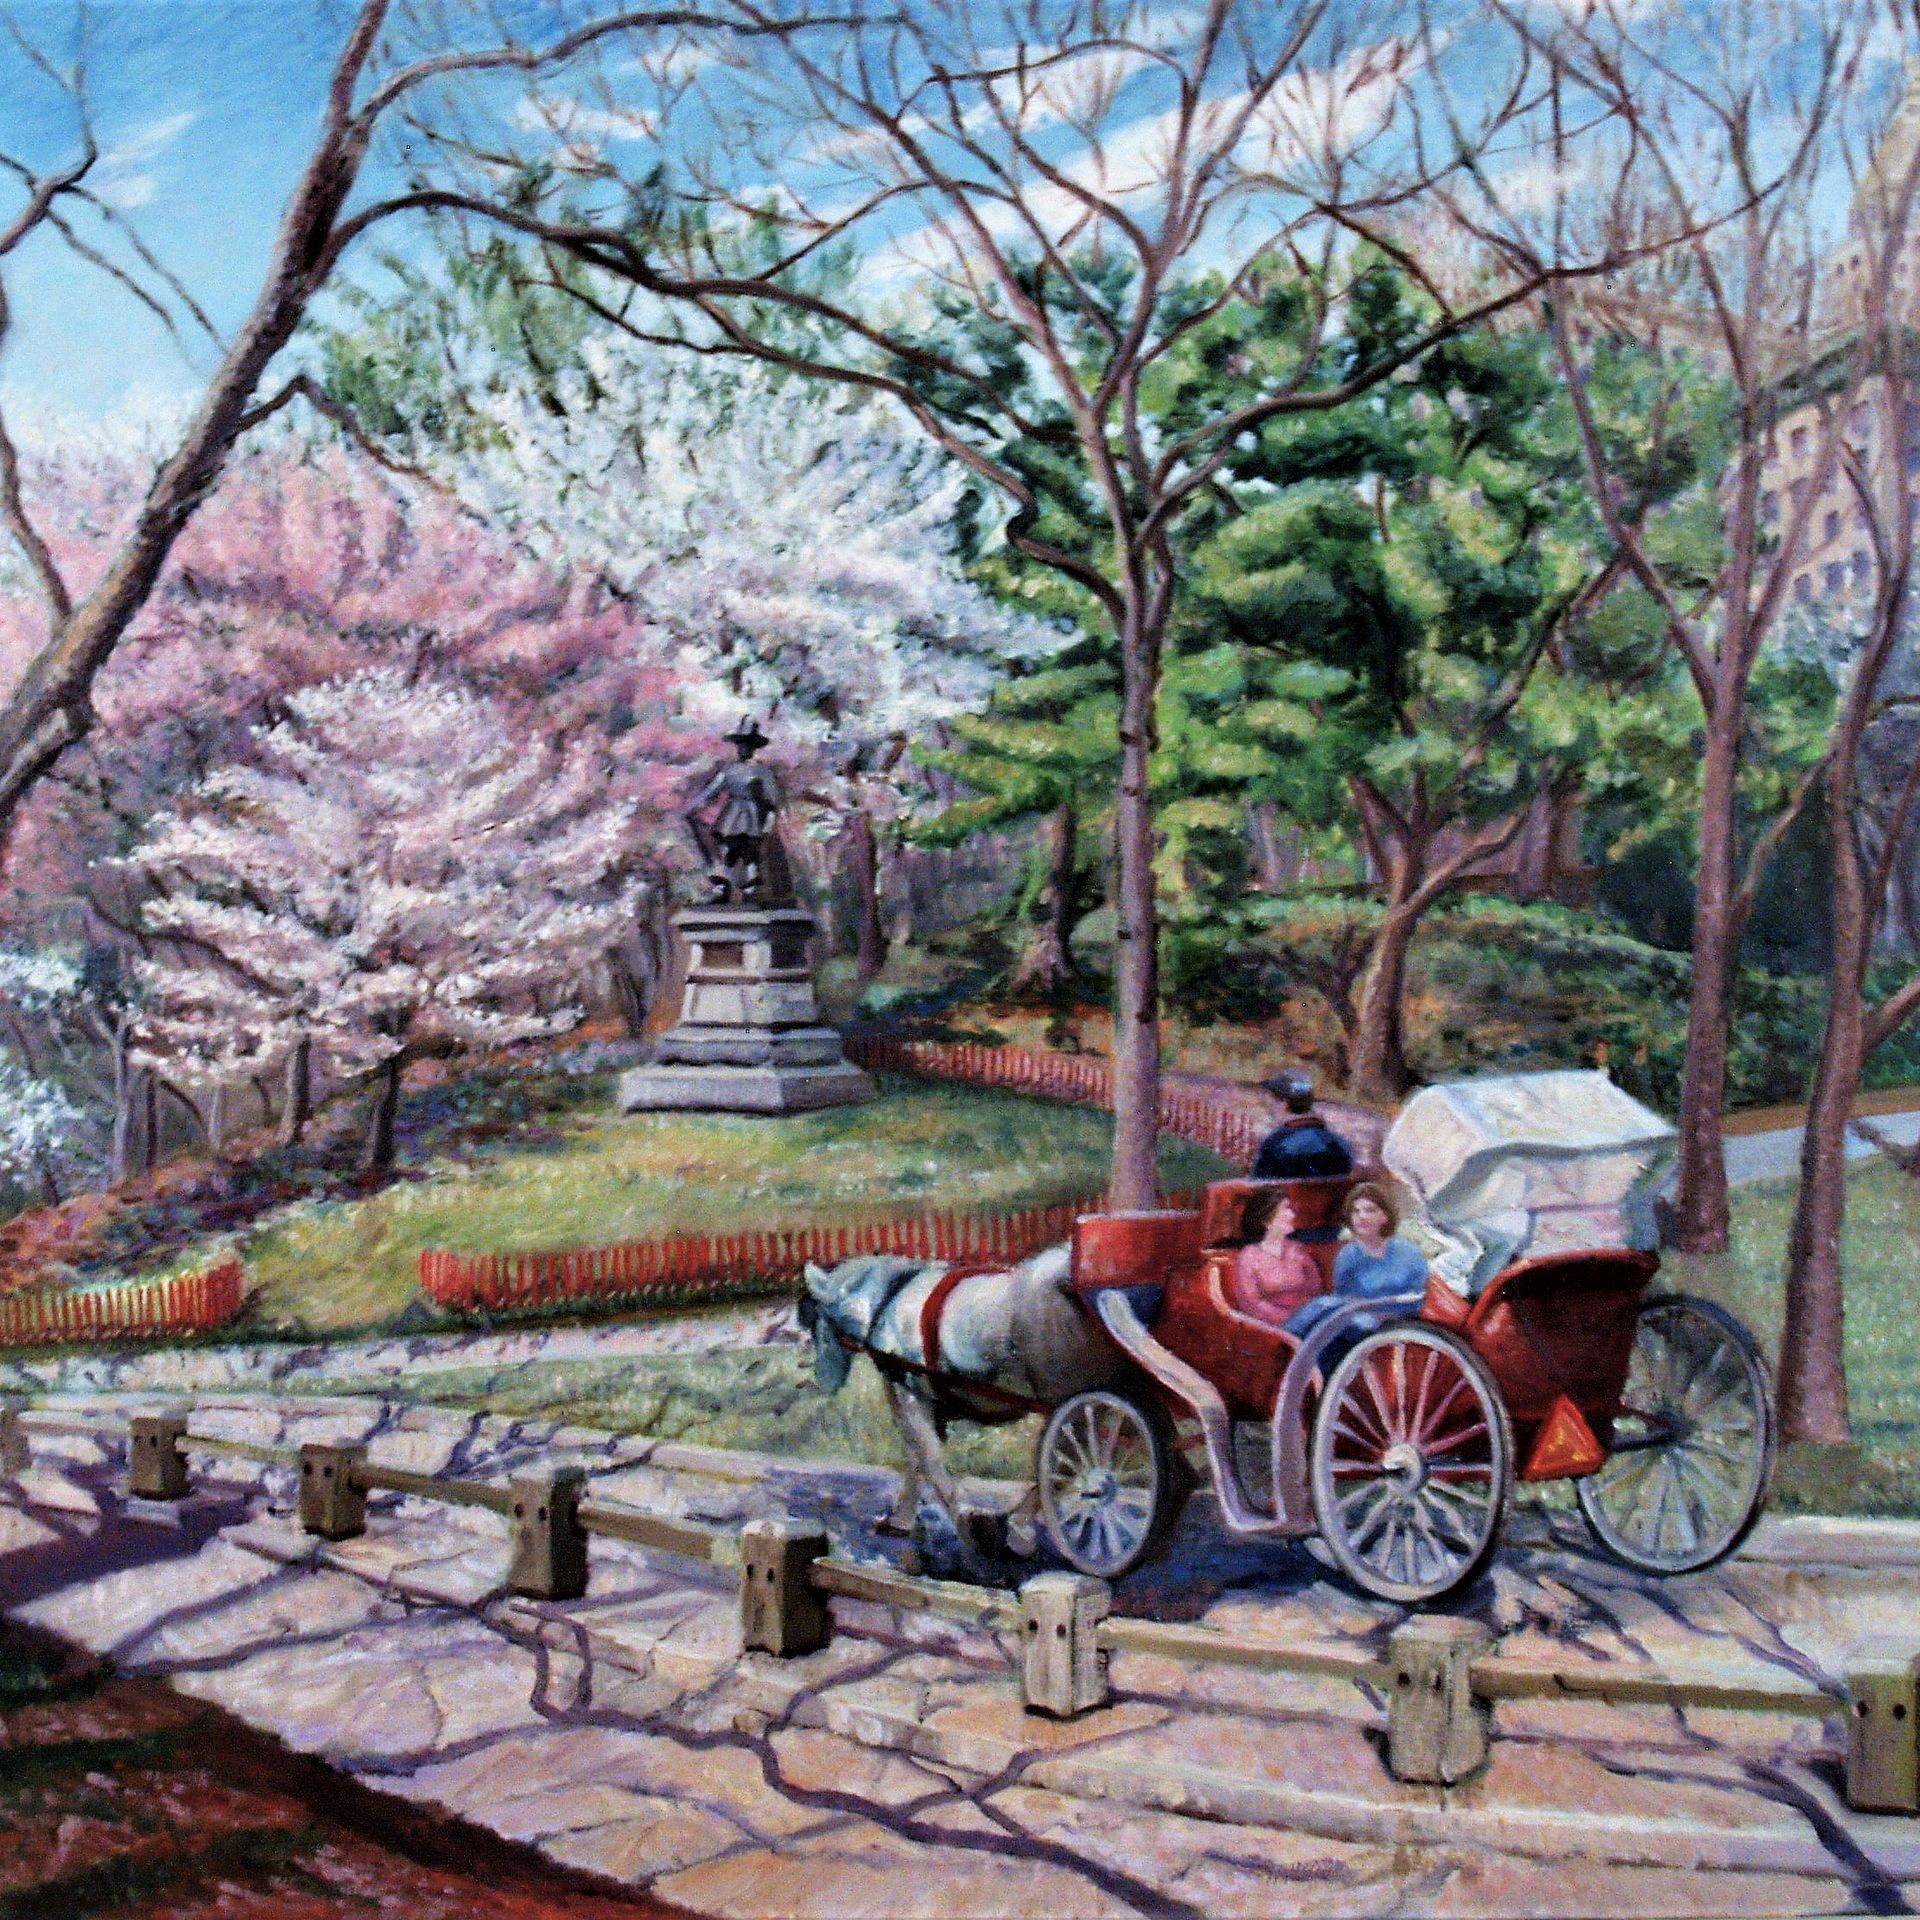 Horse & Carriage | Landscape Oil Painting by John Varriano